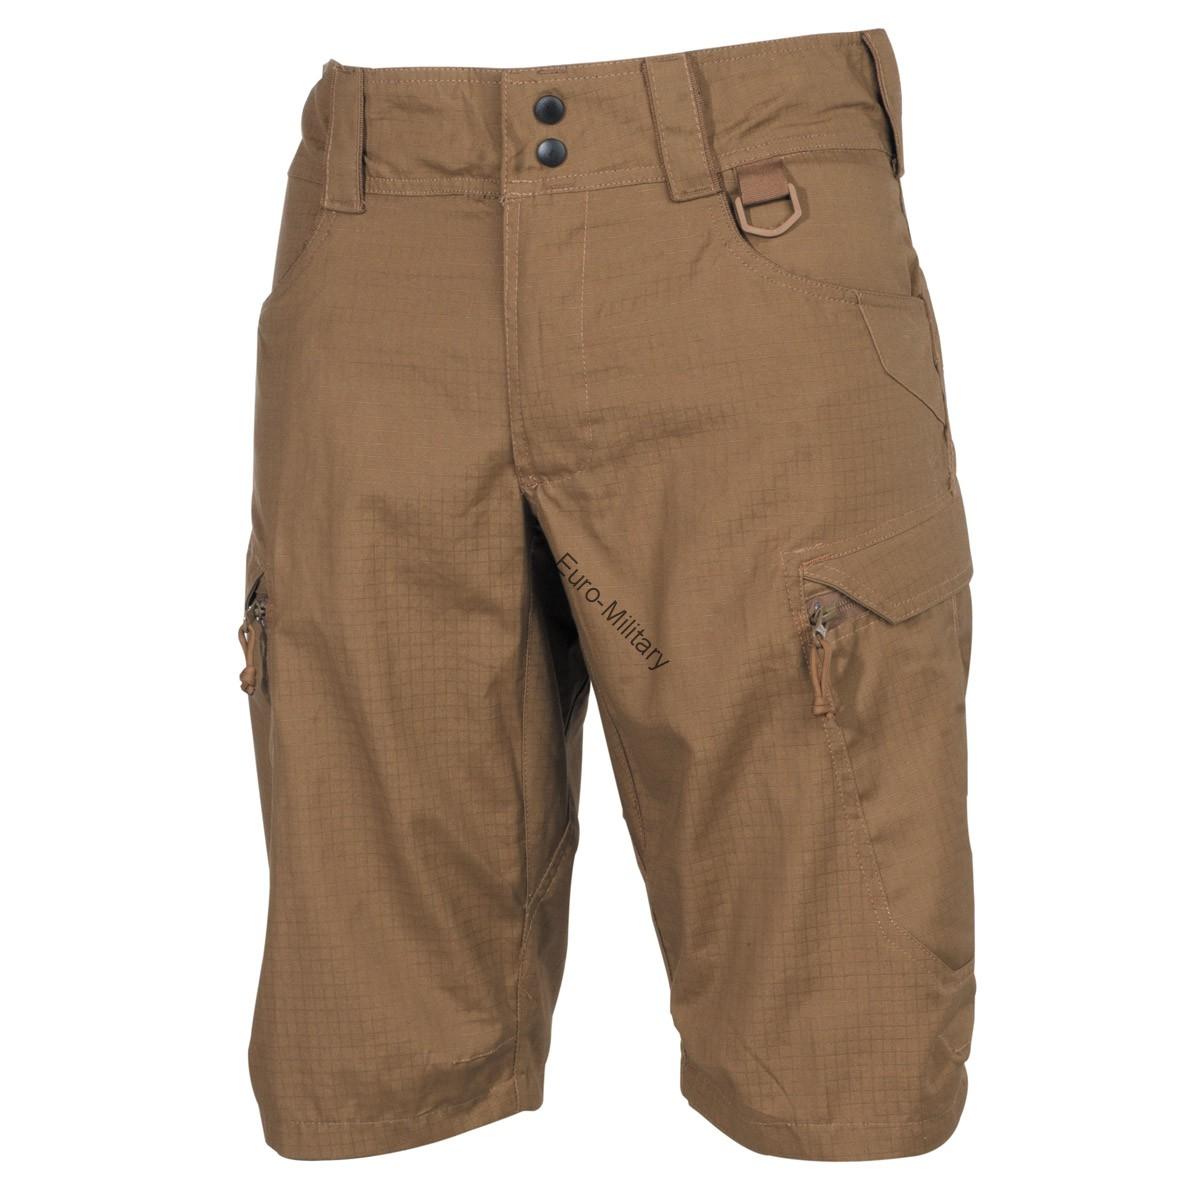 Professional Tactical Military Battle Army Shorts „Defense“ Rip Stop - Coyote